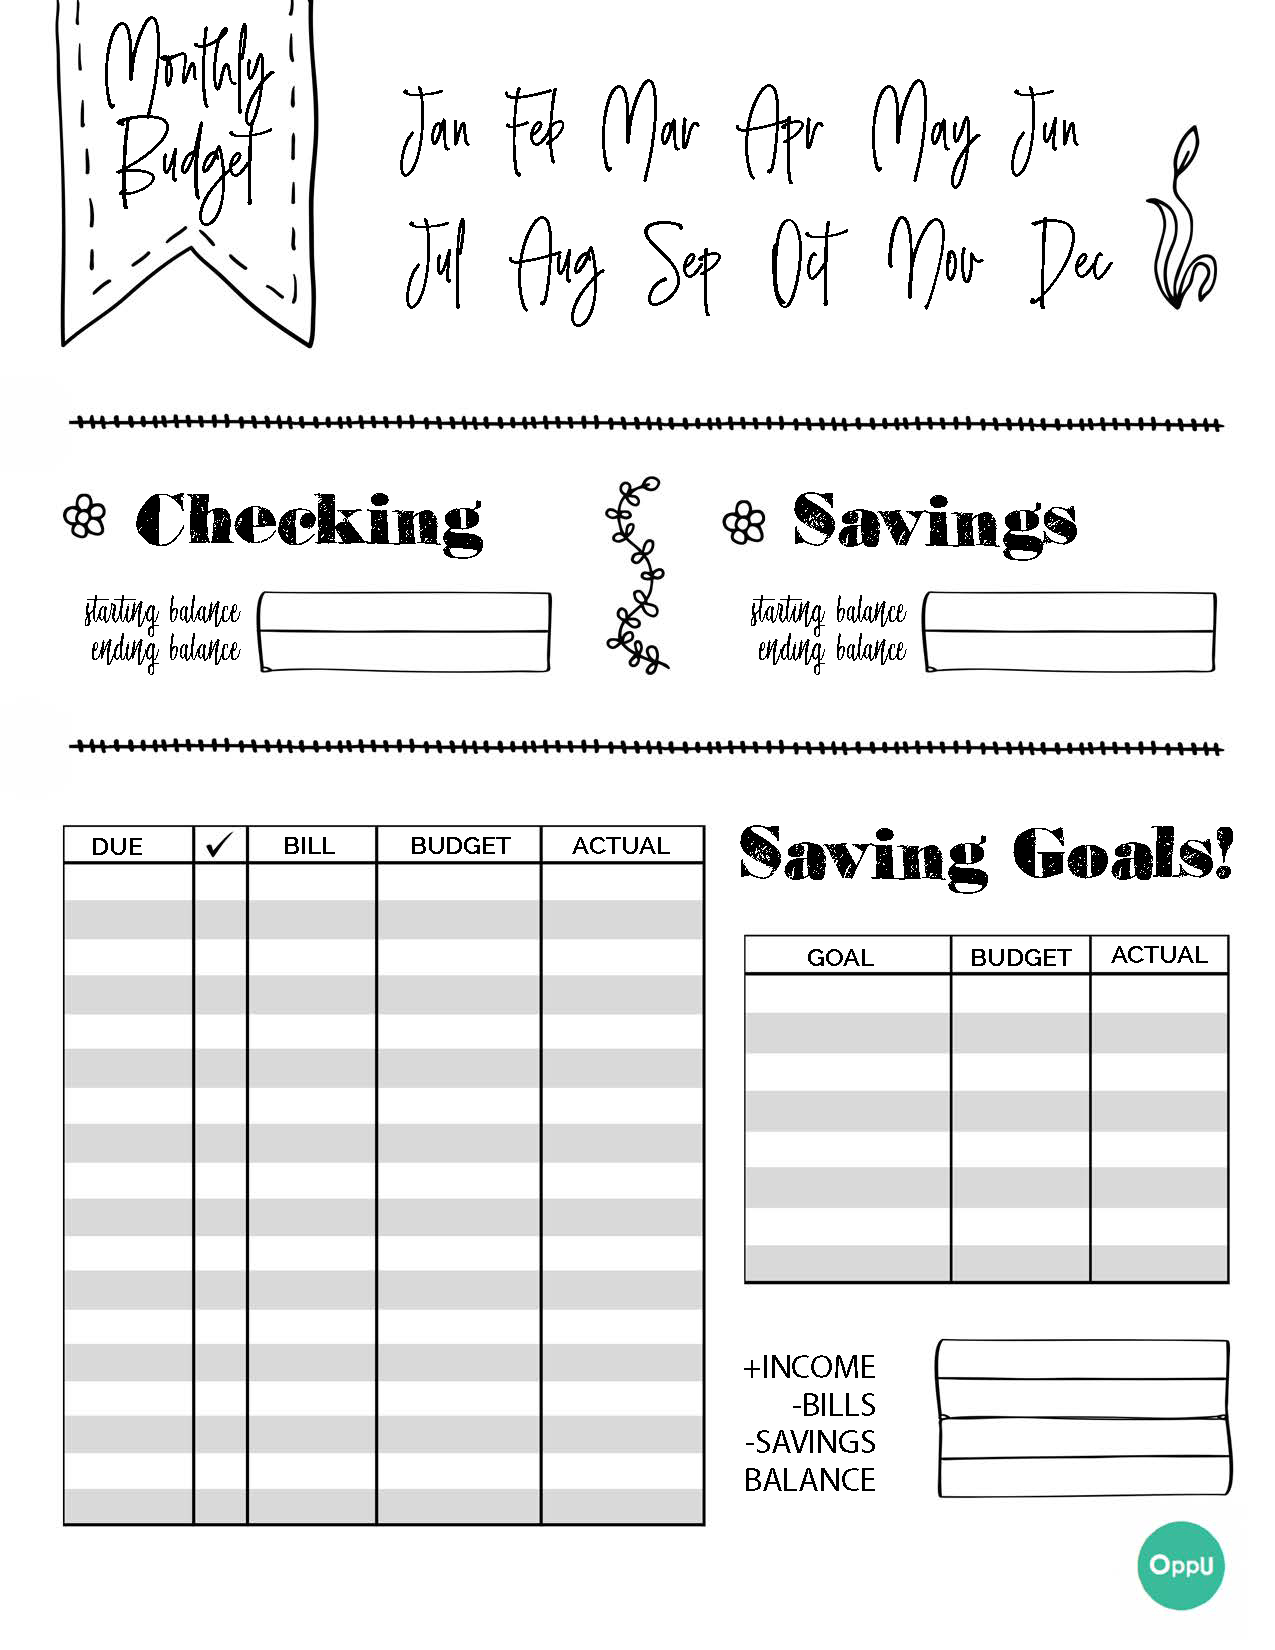 Budget Agenda: Budgeting Planner and Organizer - Create a Monthly Financial  Plan - Track Daily and Monthly Bills and Expenses - 2020 Calendar Edition